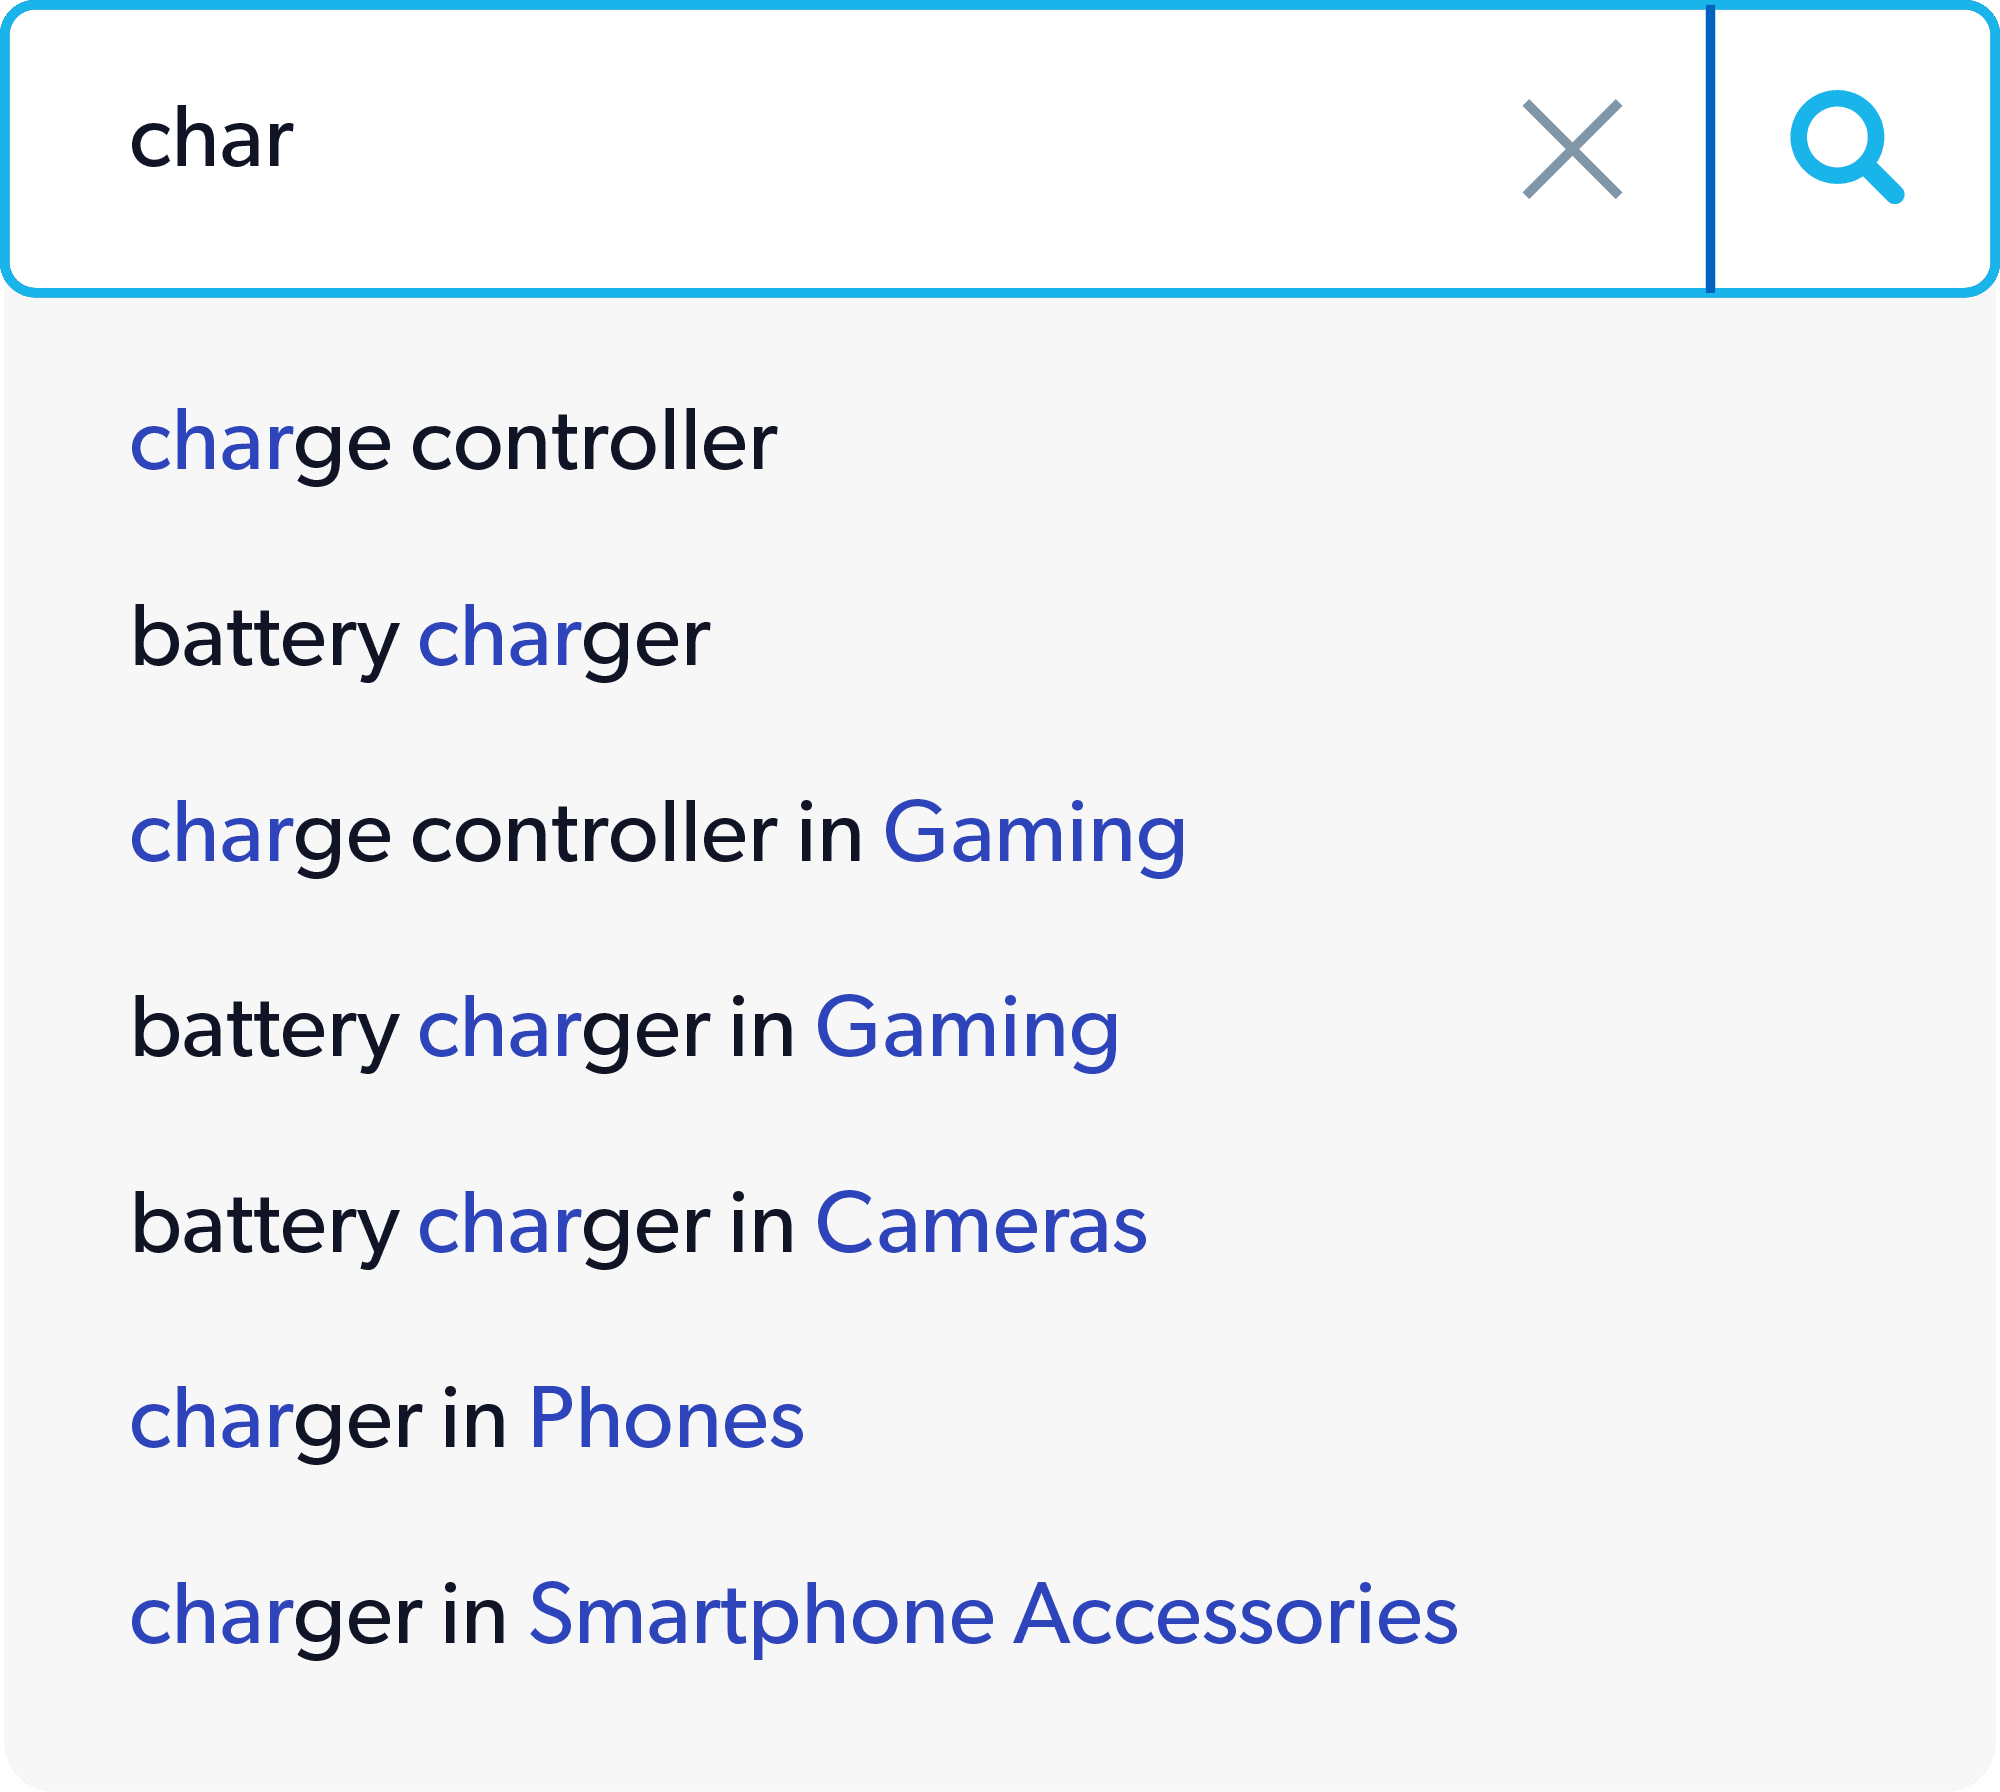 A search bar shows a drop-down set of recommendations for the term "char."